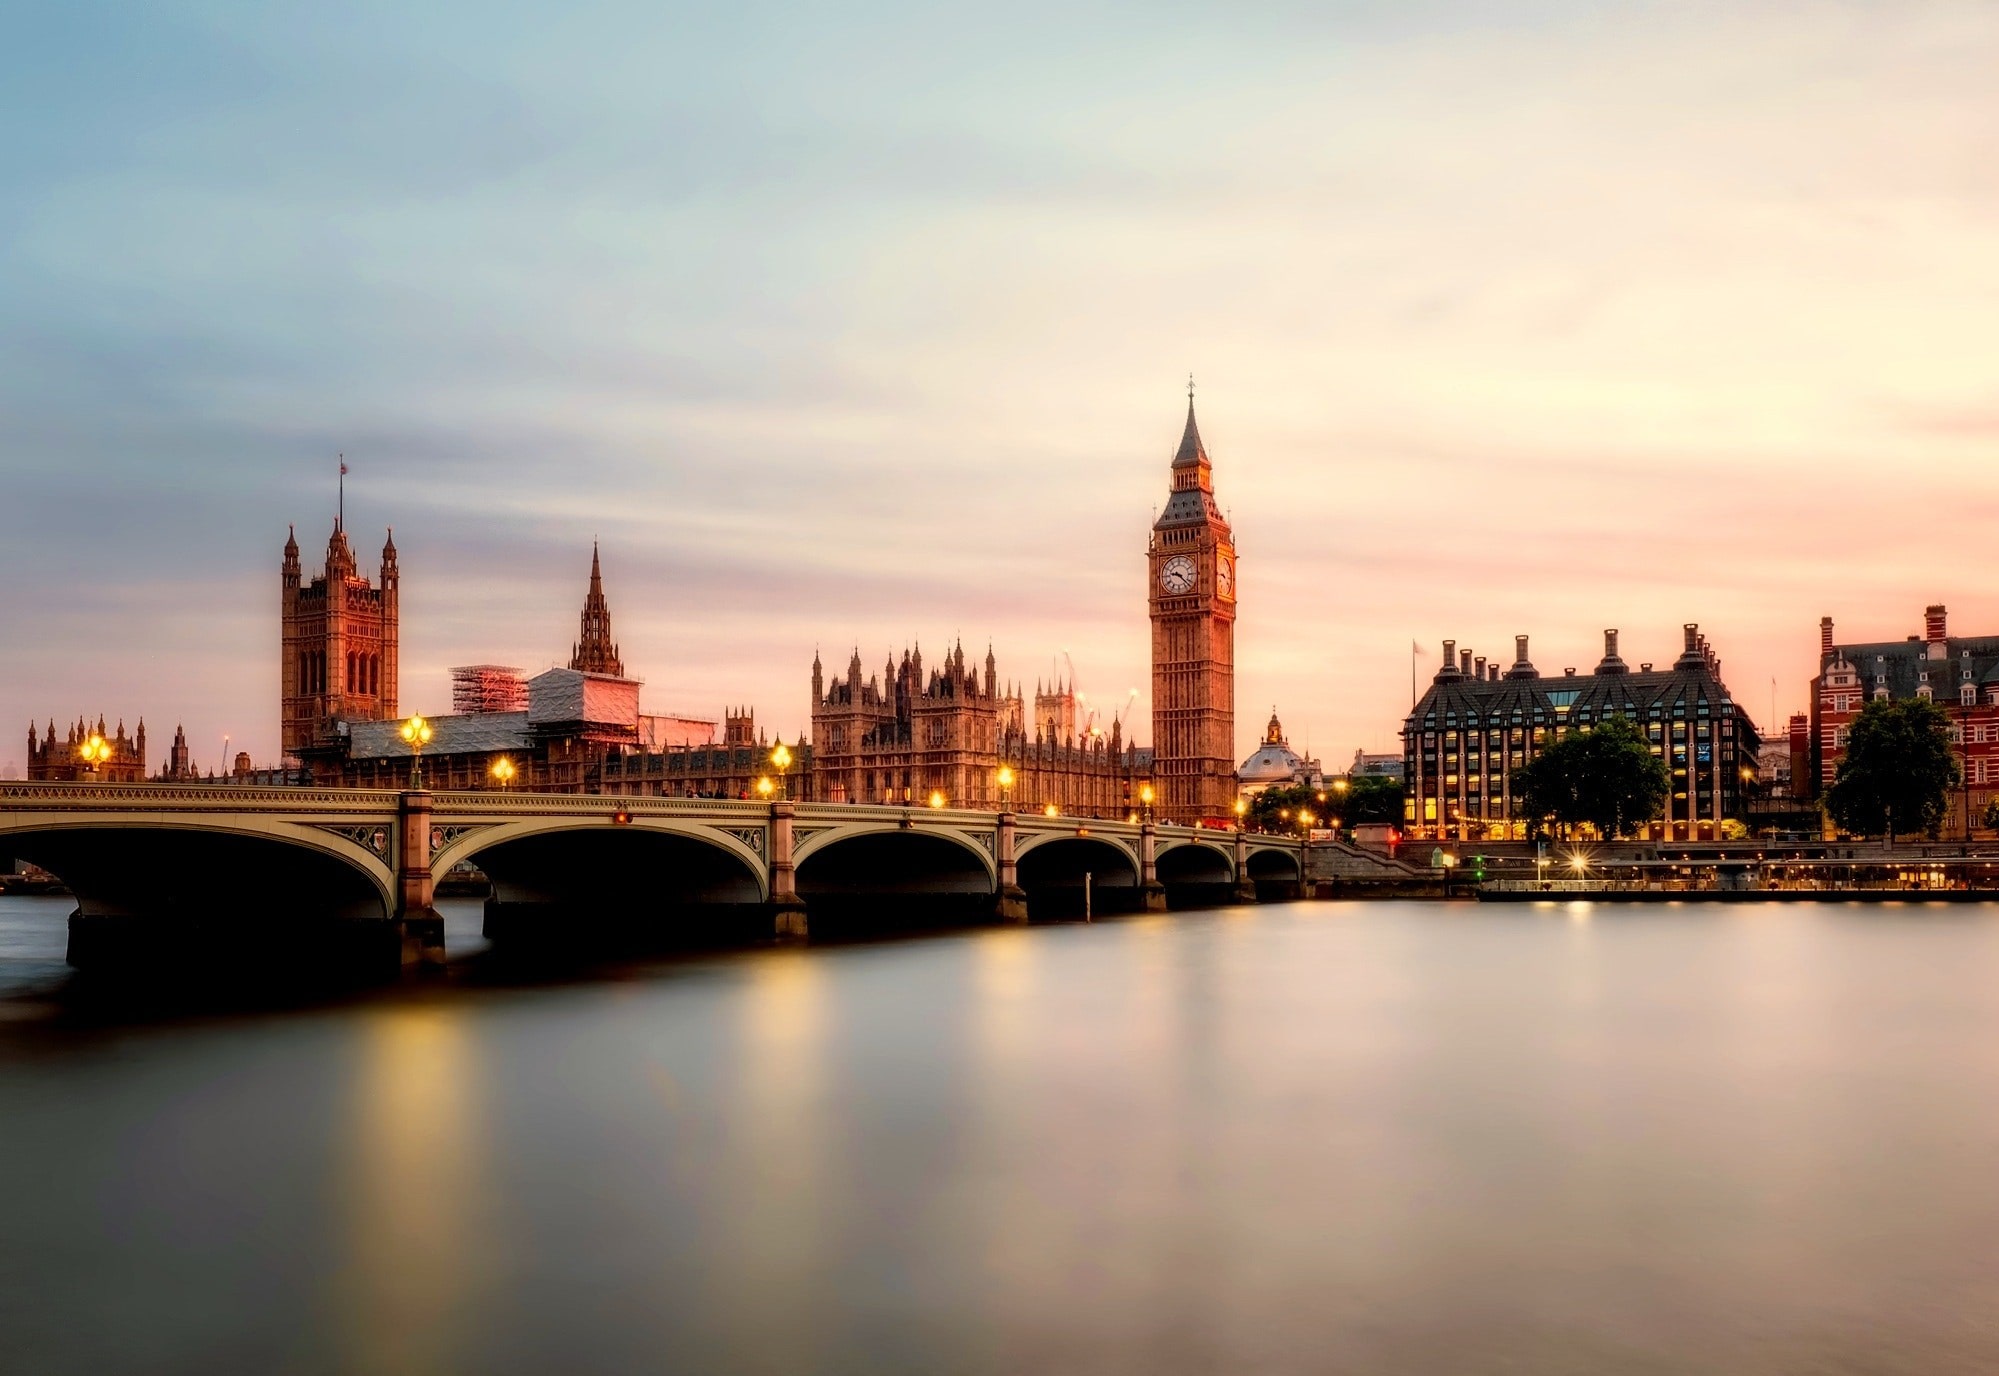 Marvel at the timeless elegance of Big Ben, standing tall against the London skyline. Plan your journey with DREW TRAVEL today!